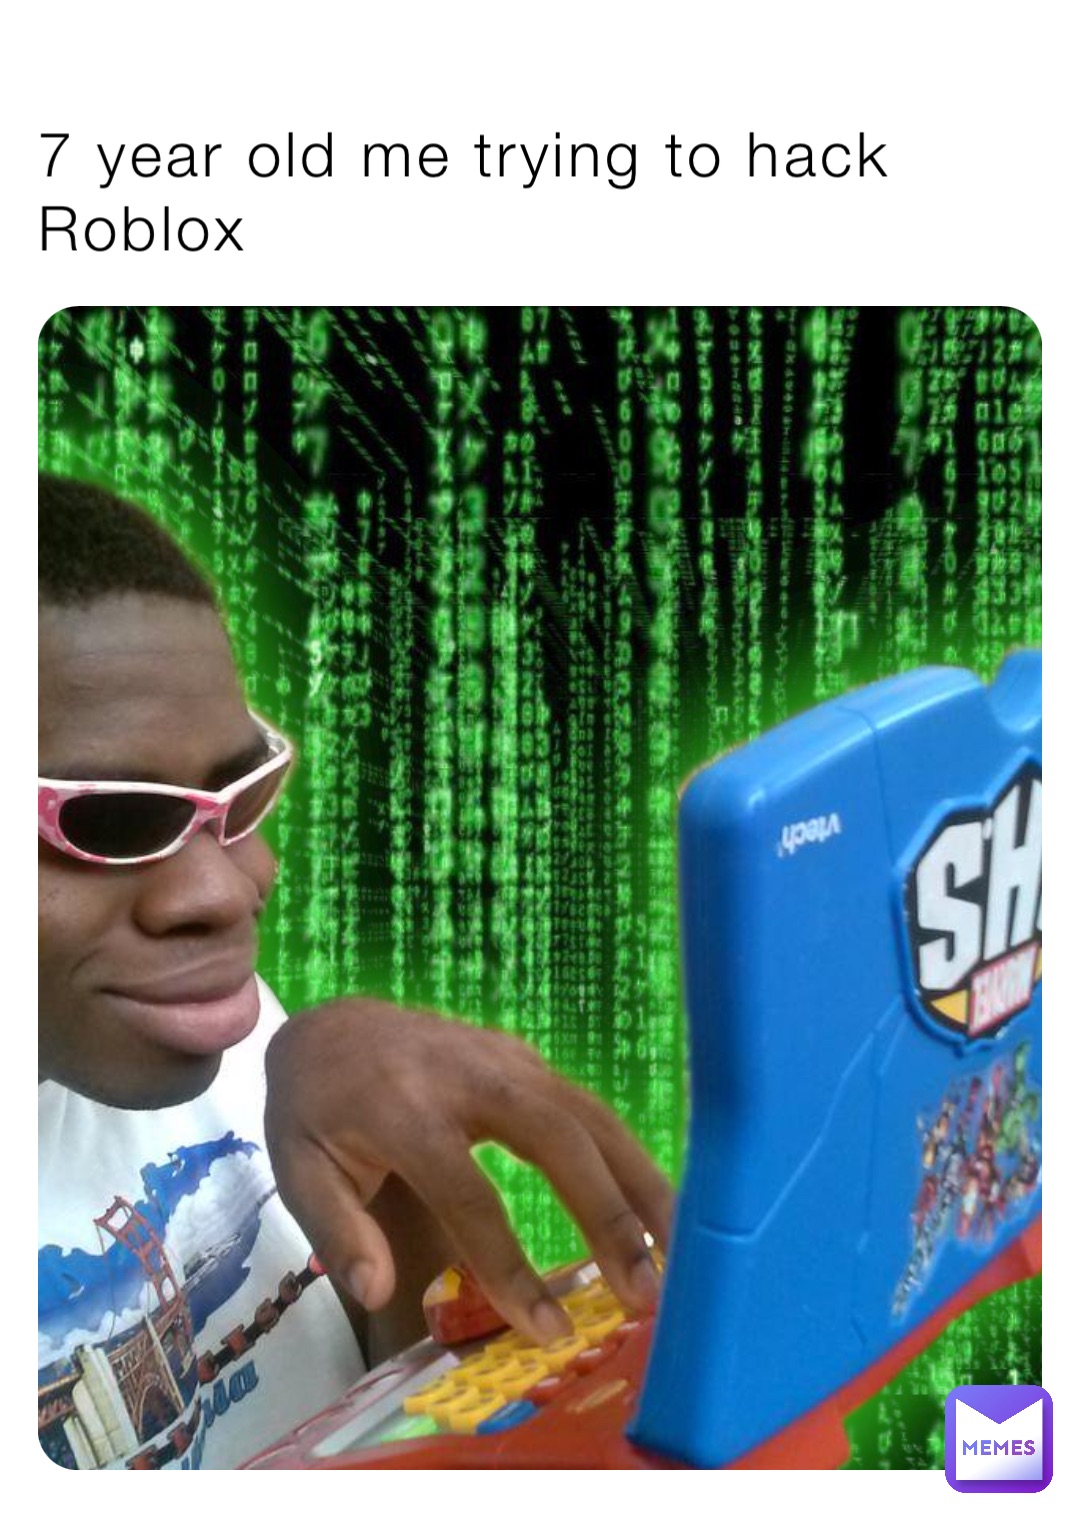 7 year old me trying to hack Roblox